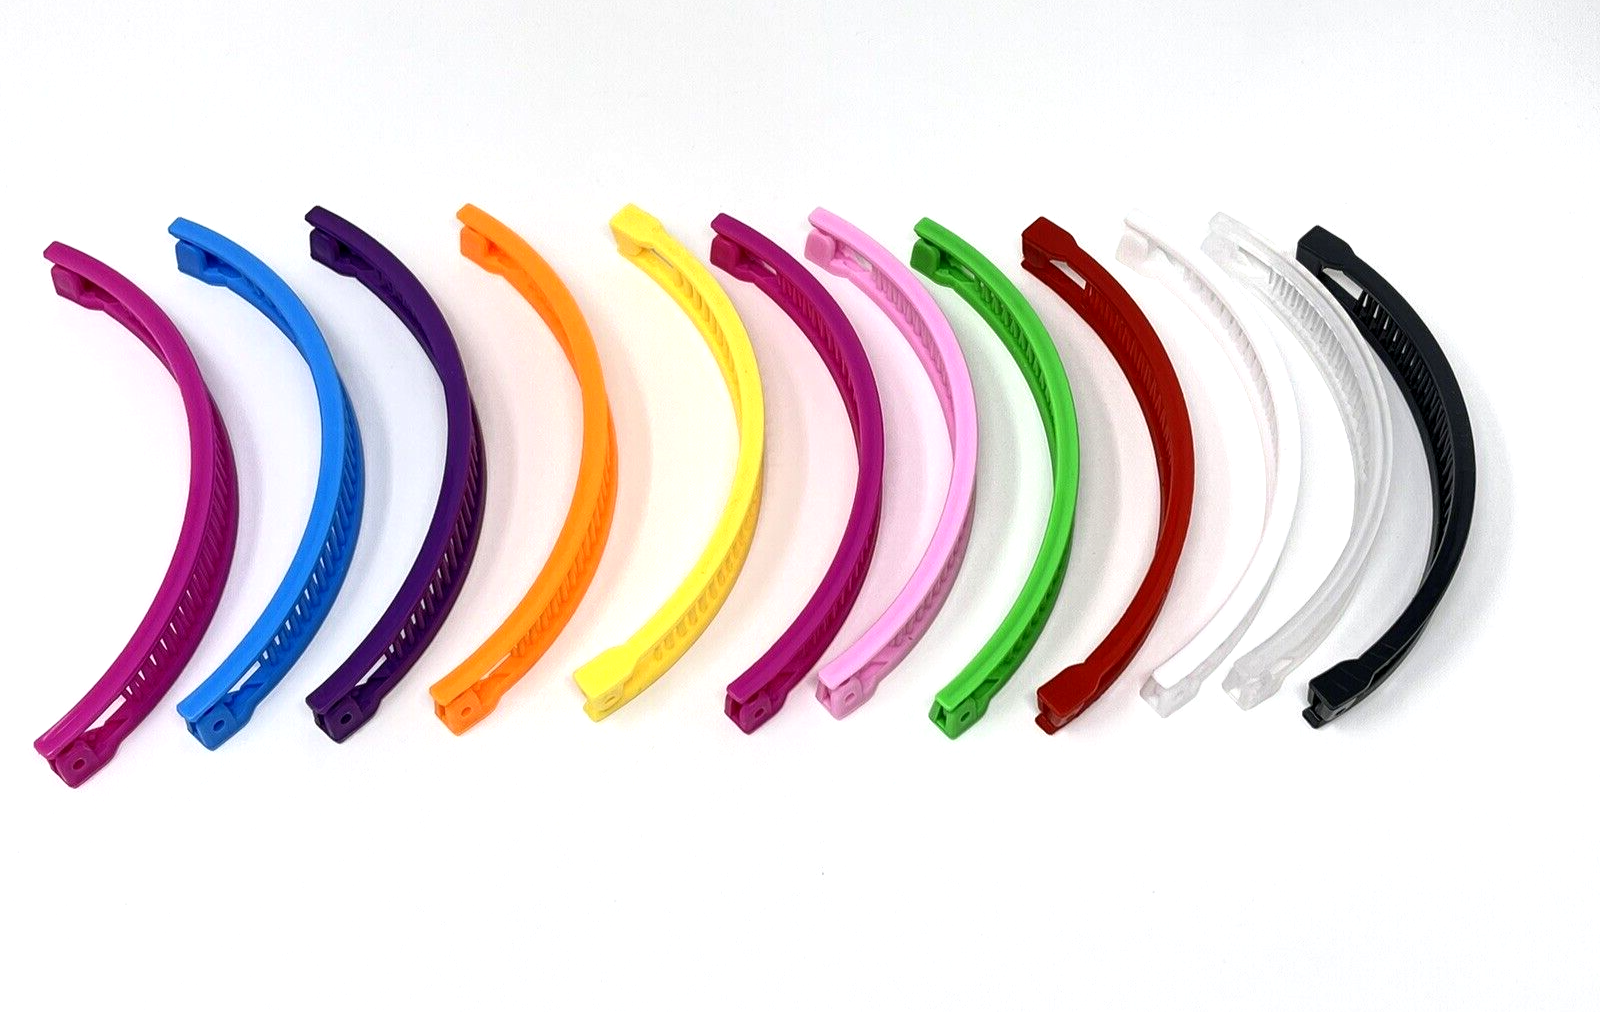 Lot of 12 Multi-Color Long Plastic Banana Hair Clips 6". Unbranded